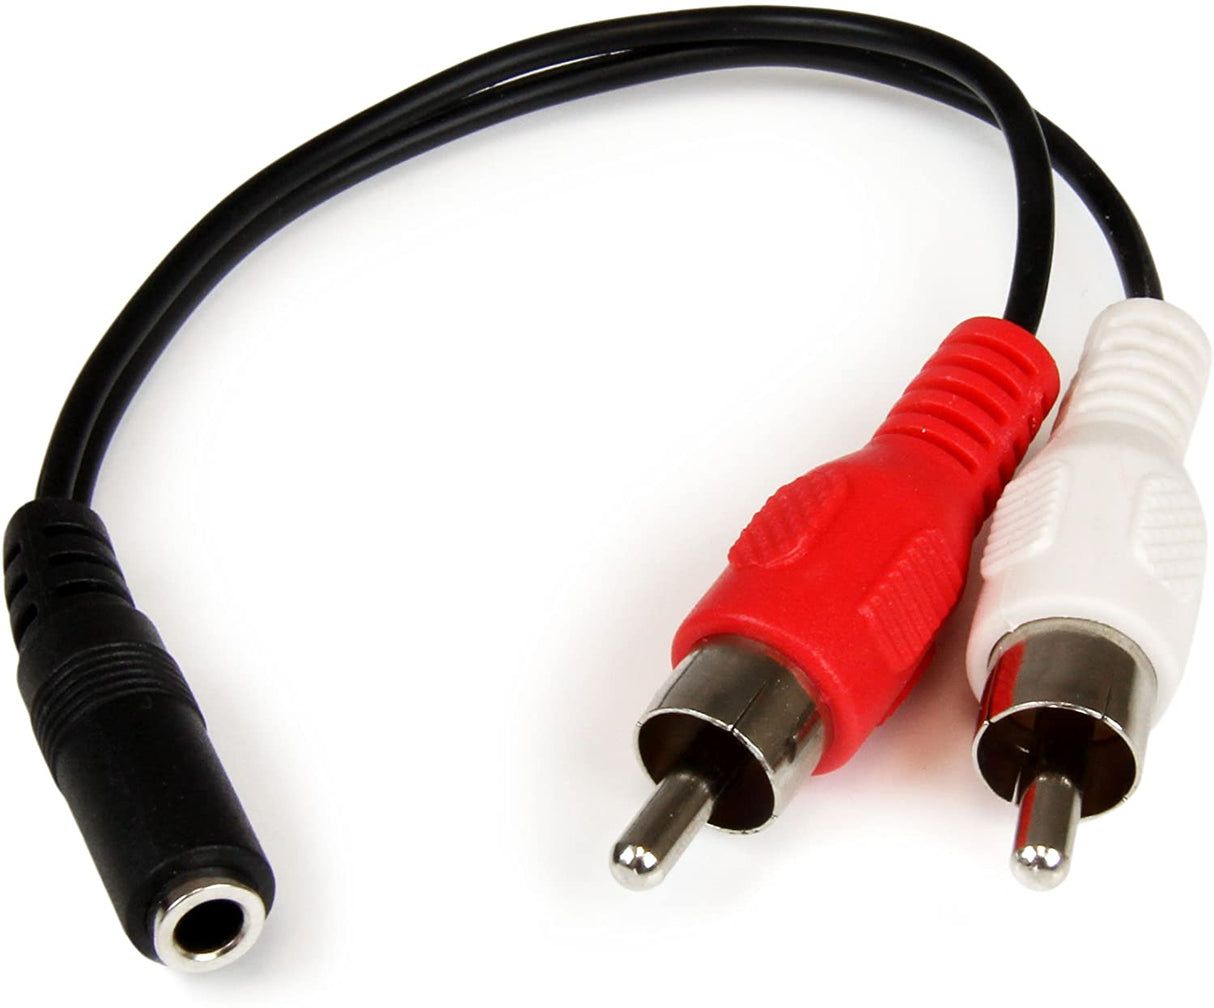 StarTech.com 6in RCA to 3.5mm Female Cable - Audio to RCA Cable - 3.5mm Female to 2x RCA Male - Aux to RCA - Stereo Audio Cable (MUFMRCA) 15 cm/6 inches